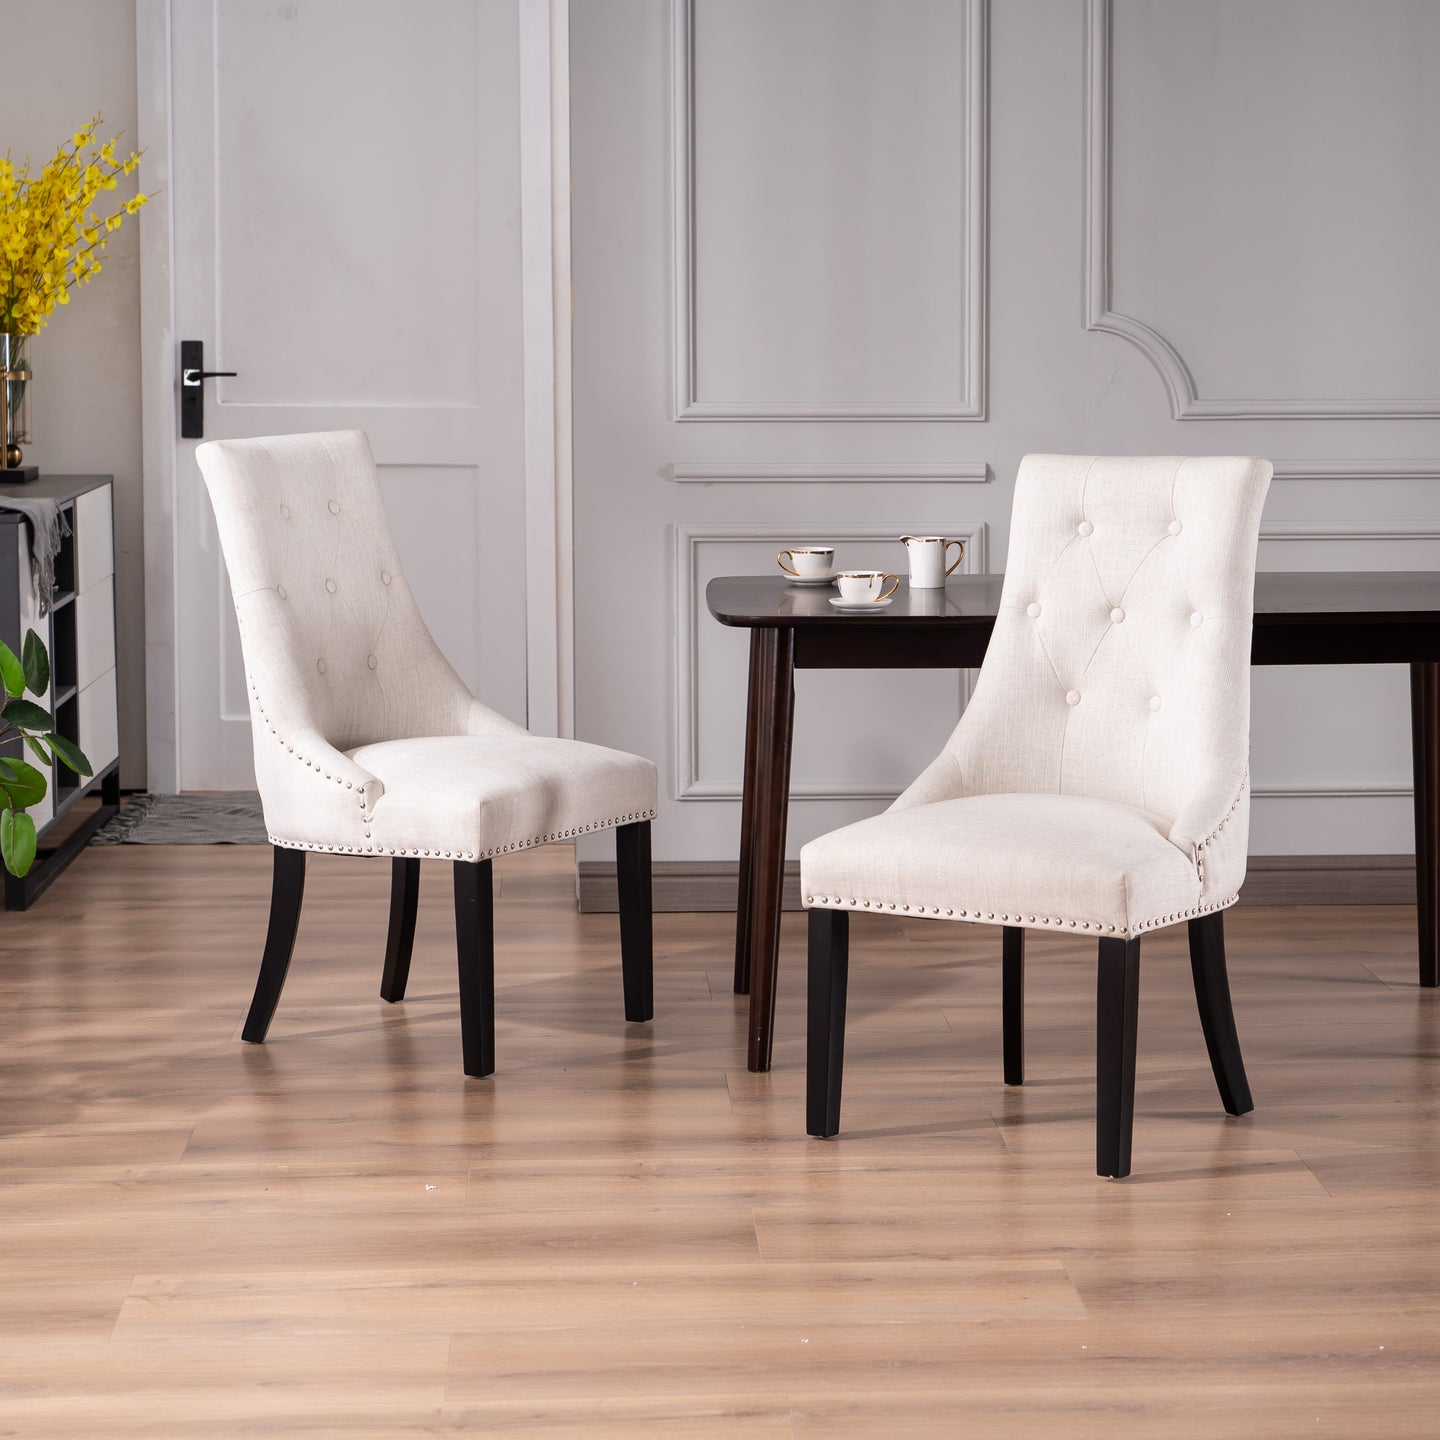 Mazone dining chair